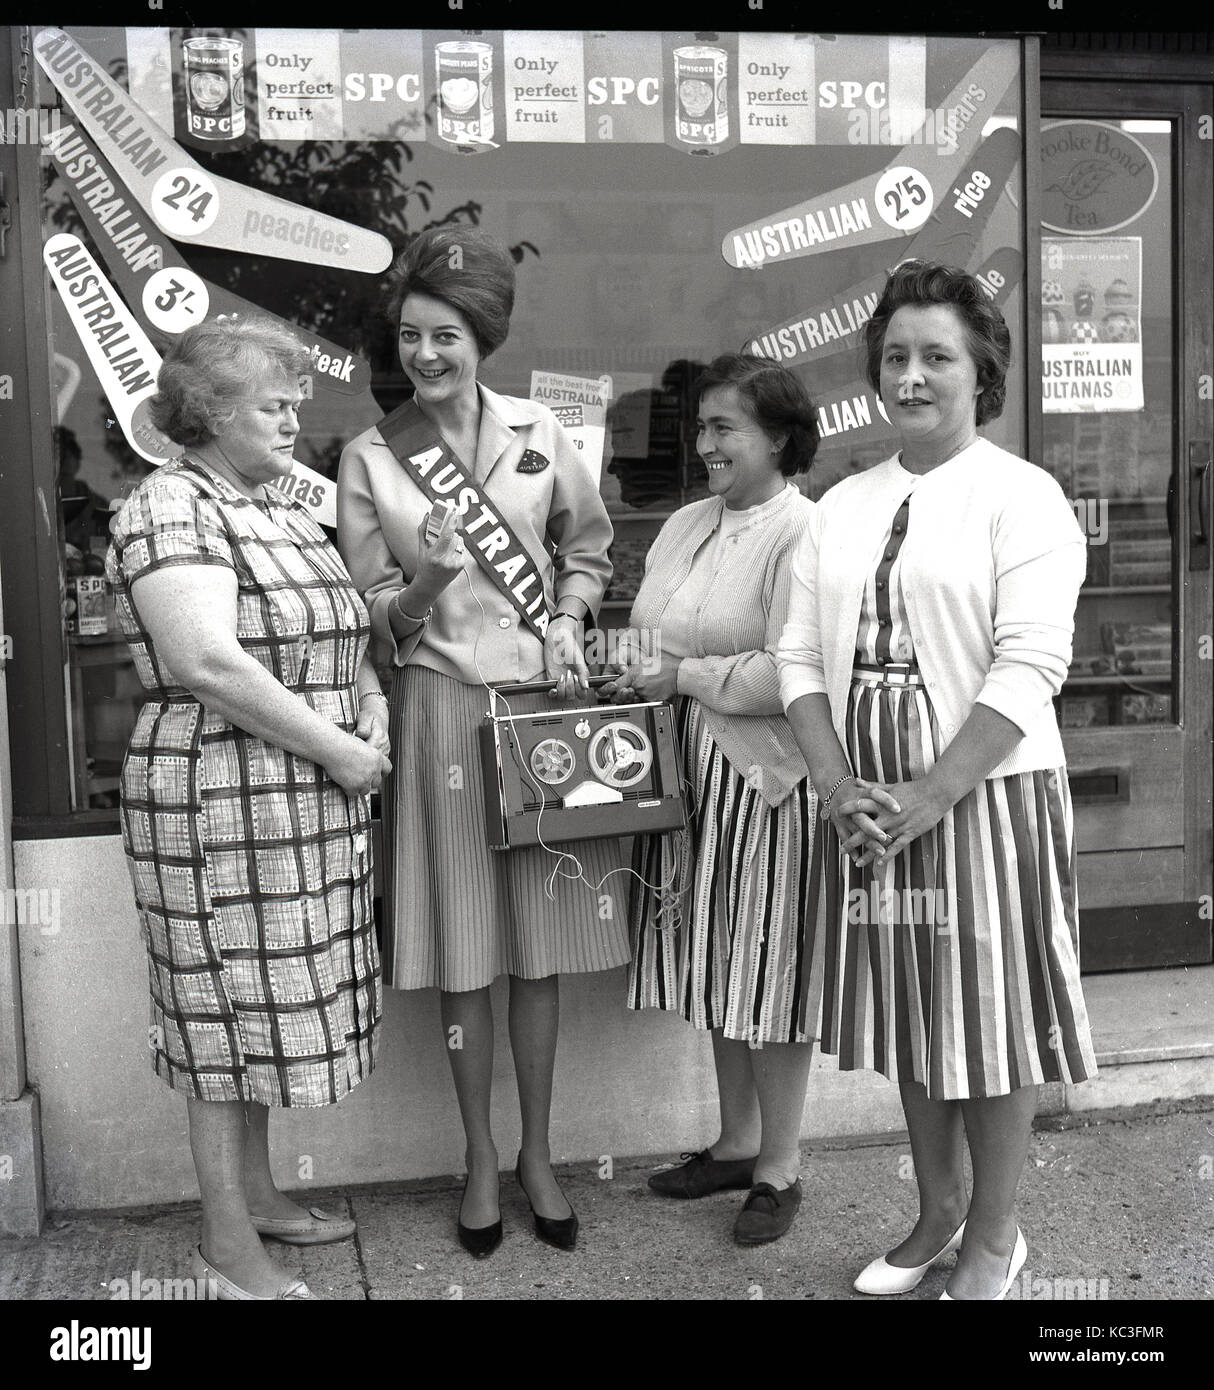 1960s, historical, promotional lady from the Australian canned fruit company, SPC, talking to local female consumers about their products and recording their comments on a reel-to-reel tape recorder, Aylesbury, Bucks, England, UK. Stock Photo